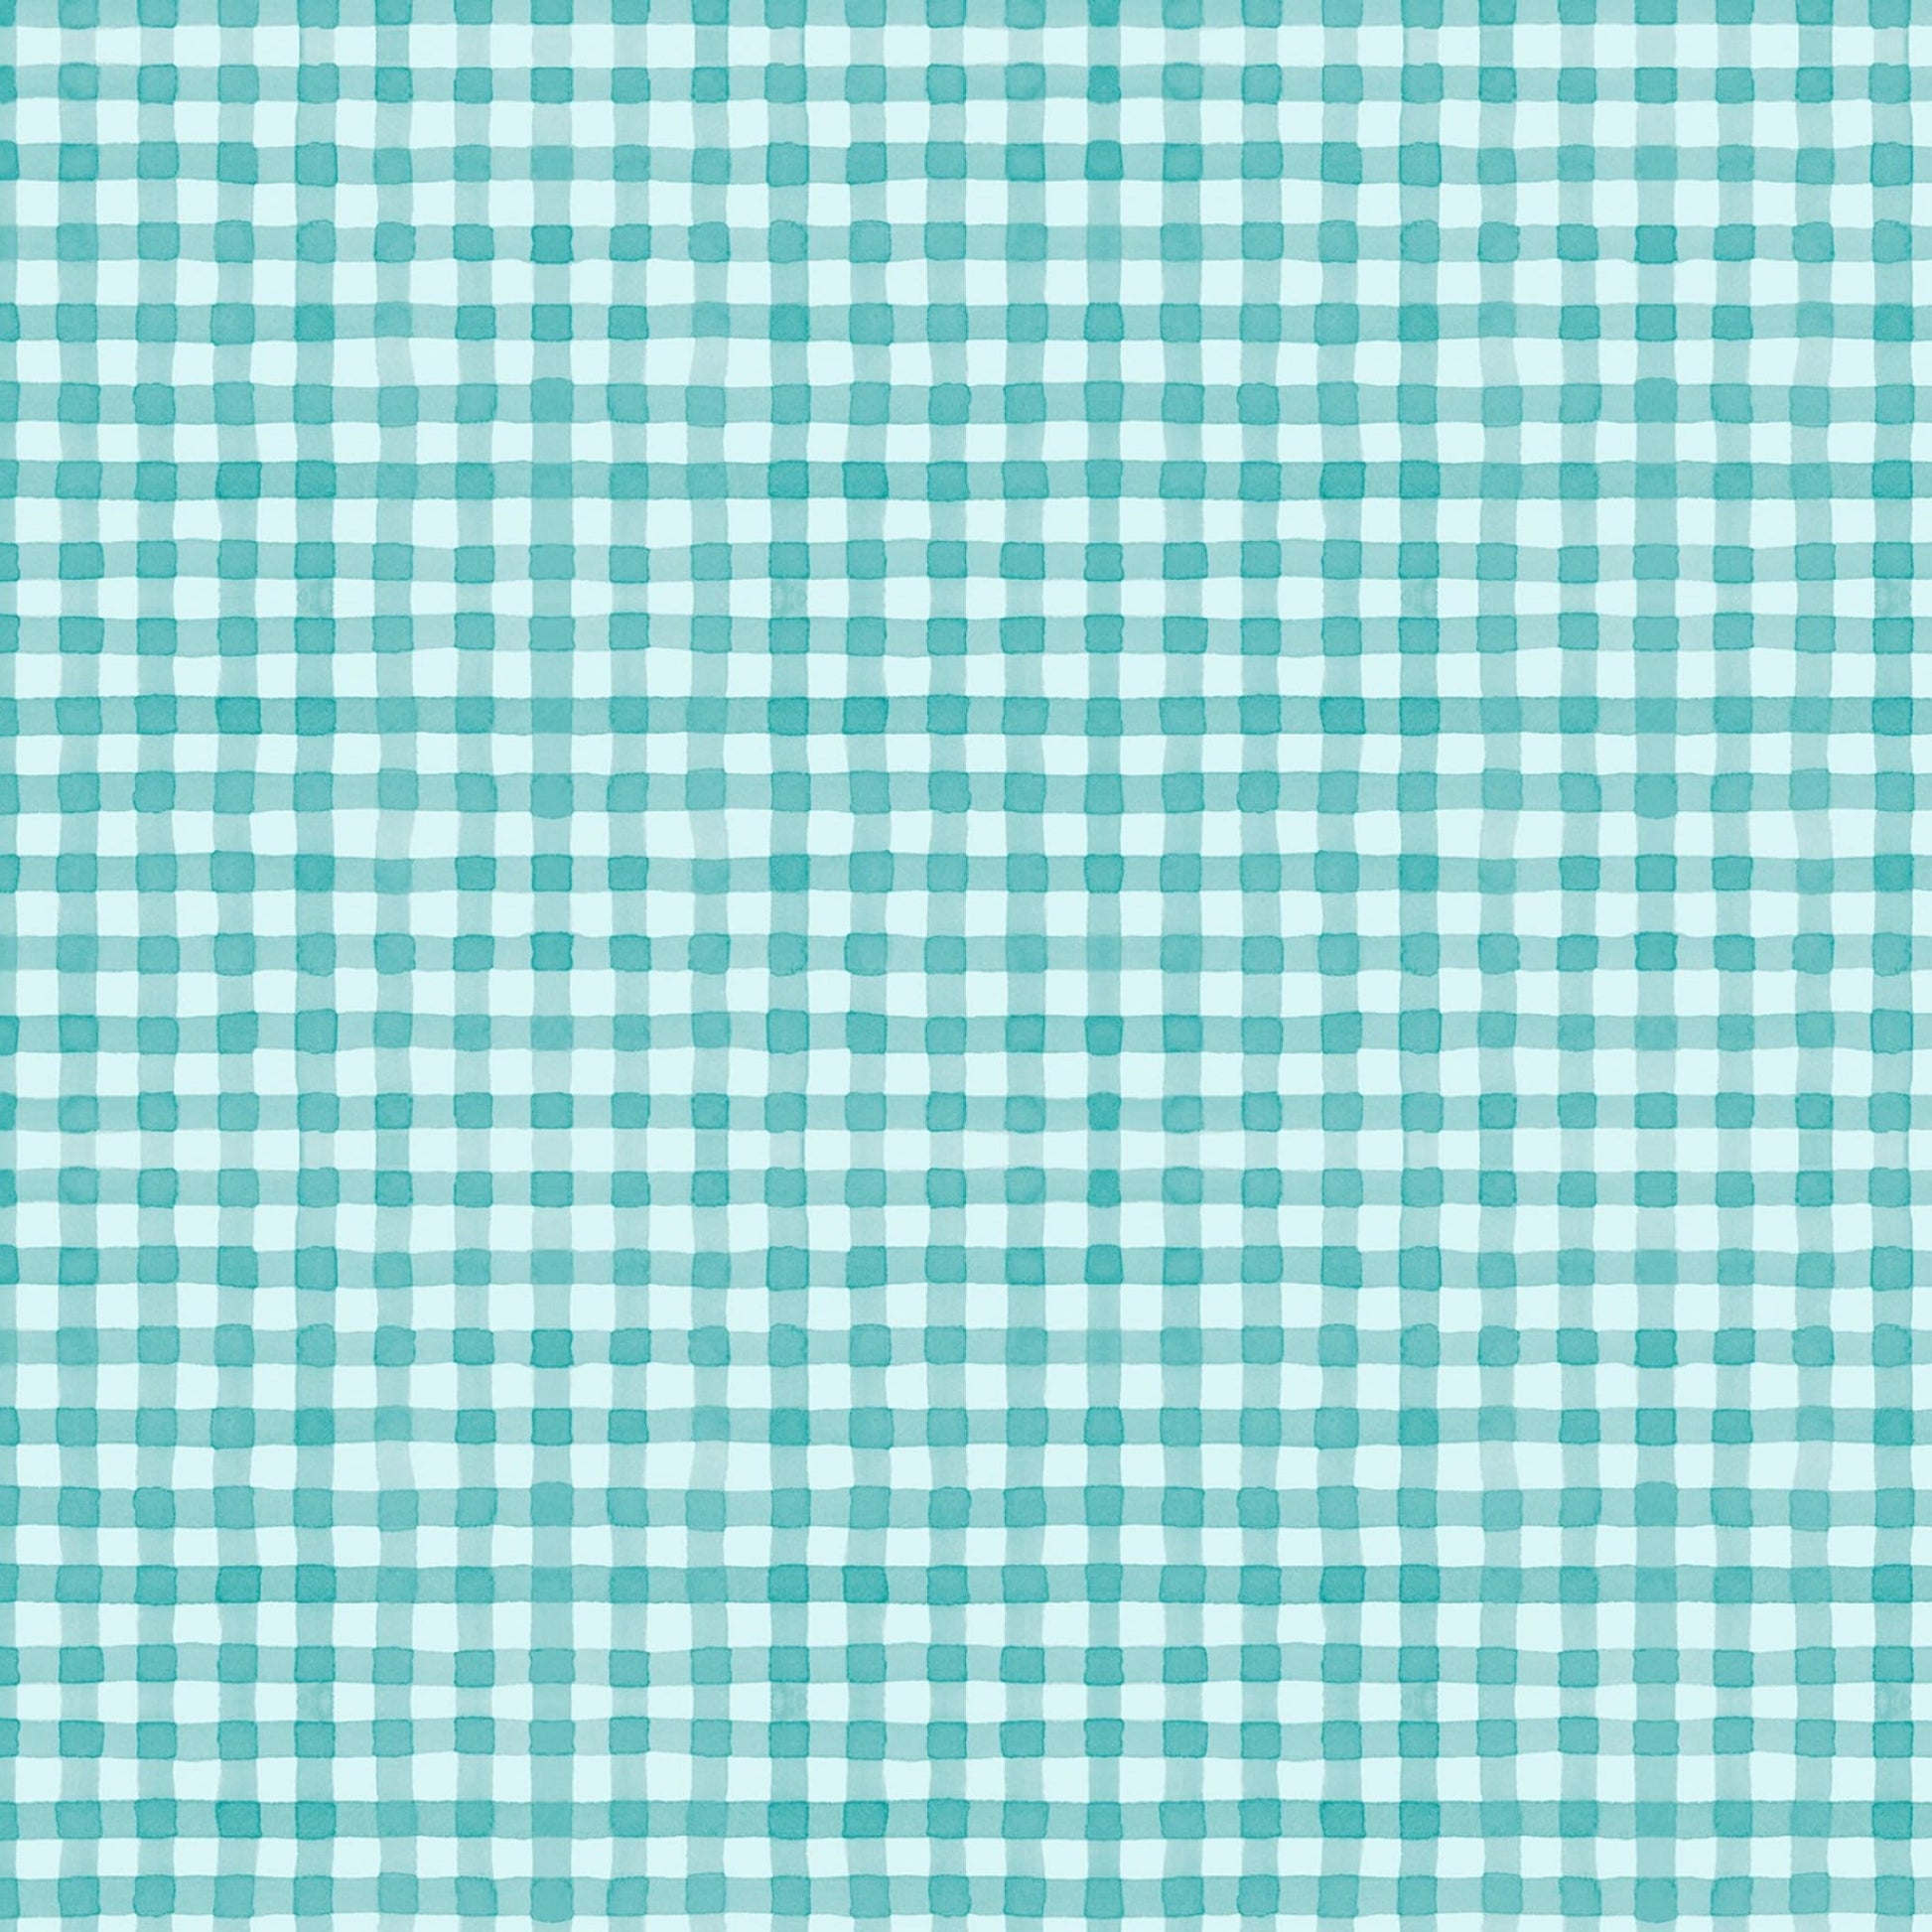 Wilmington Prints Blue / FQ (18"x21") Light Teal Gingham, Leaf Texture Teal or Repeating Stripe Fabric by the Yard from Wilmington Prints Sunflower Sweet by Lisa Audit